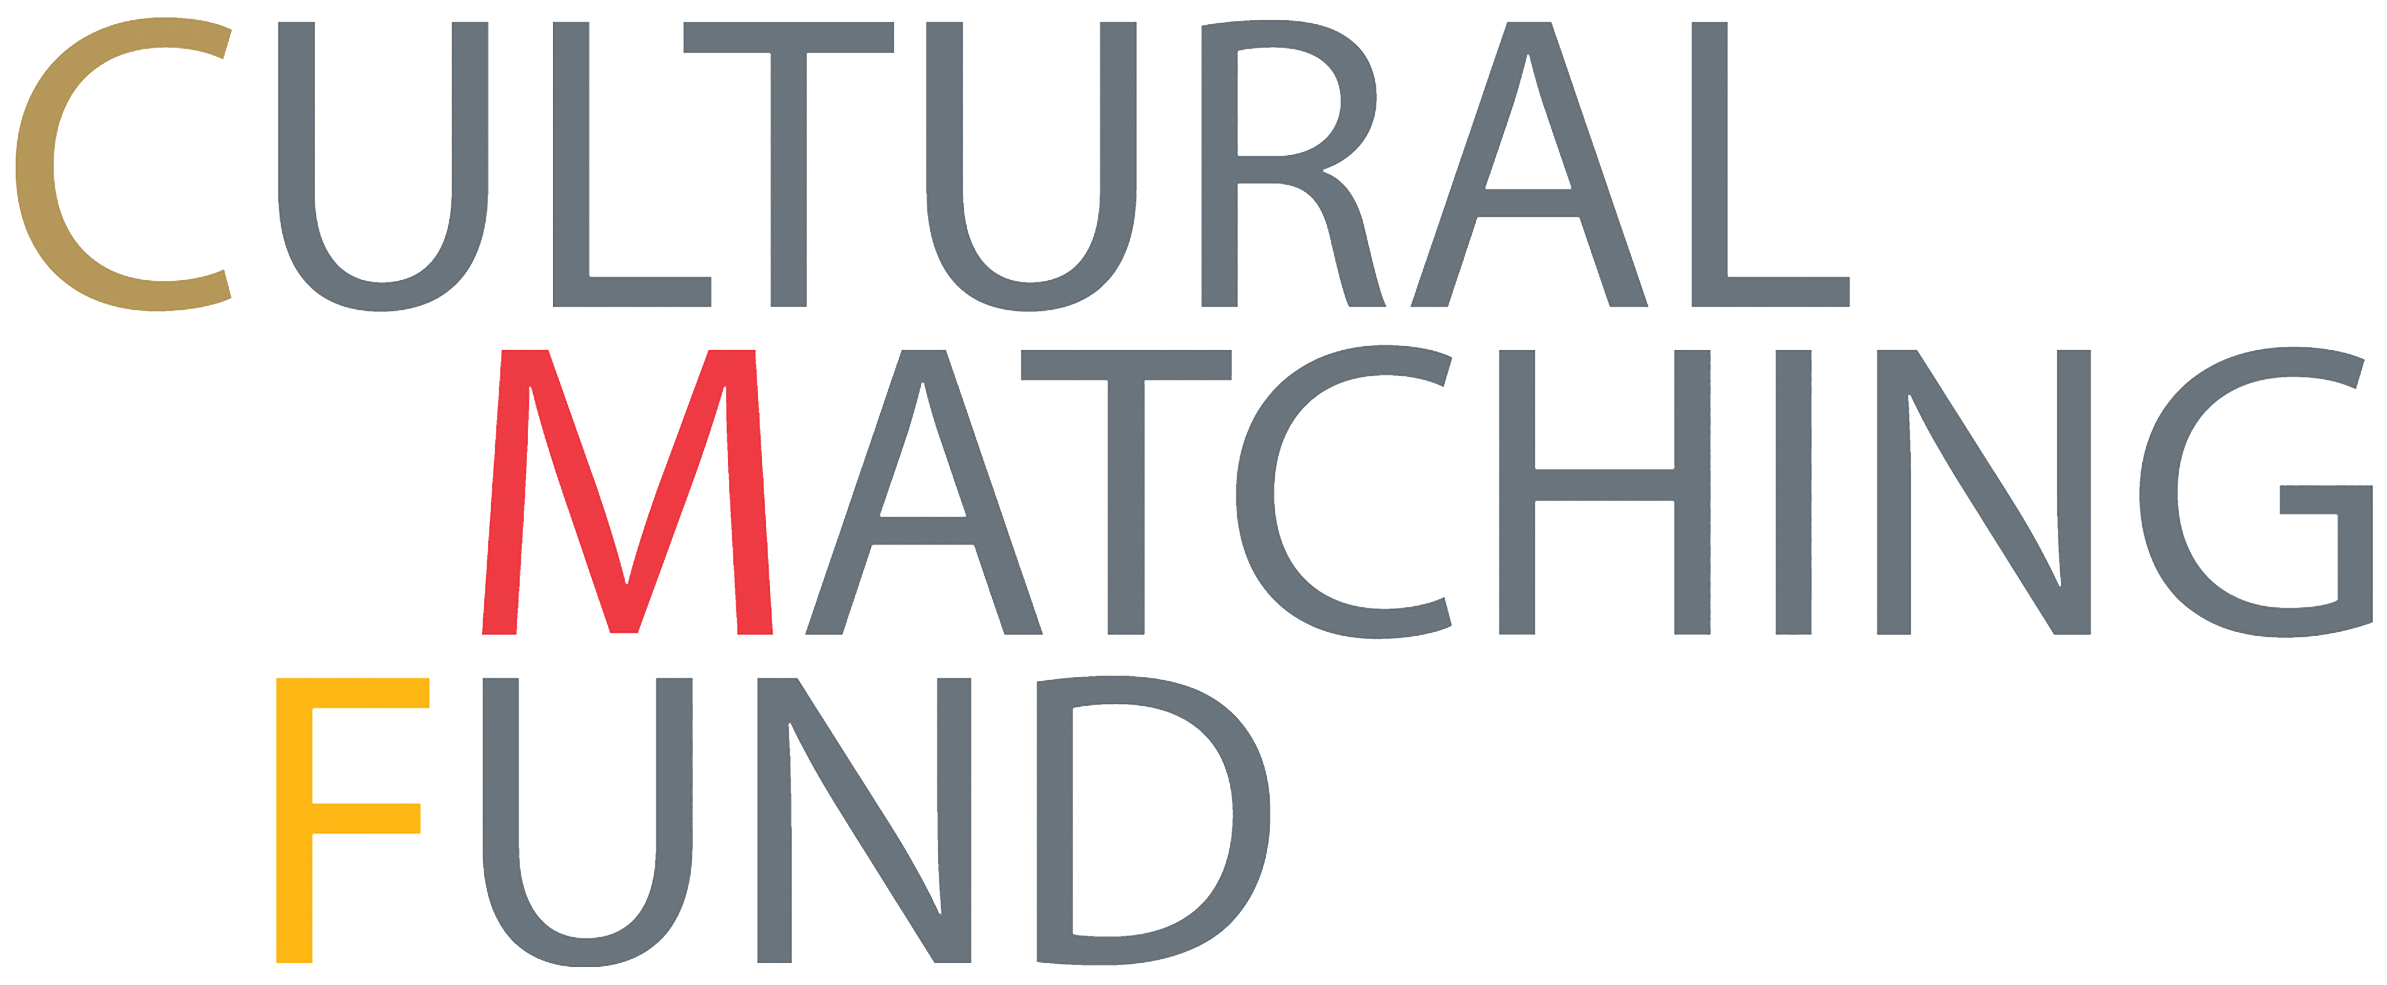 This logo of CMF features the words ‘CULTURAL MATCH FUND’ in predominantly light grey, with the letters ‘C’ in gold, ‘M’ in red and ‘F’ in orange-yellow.